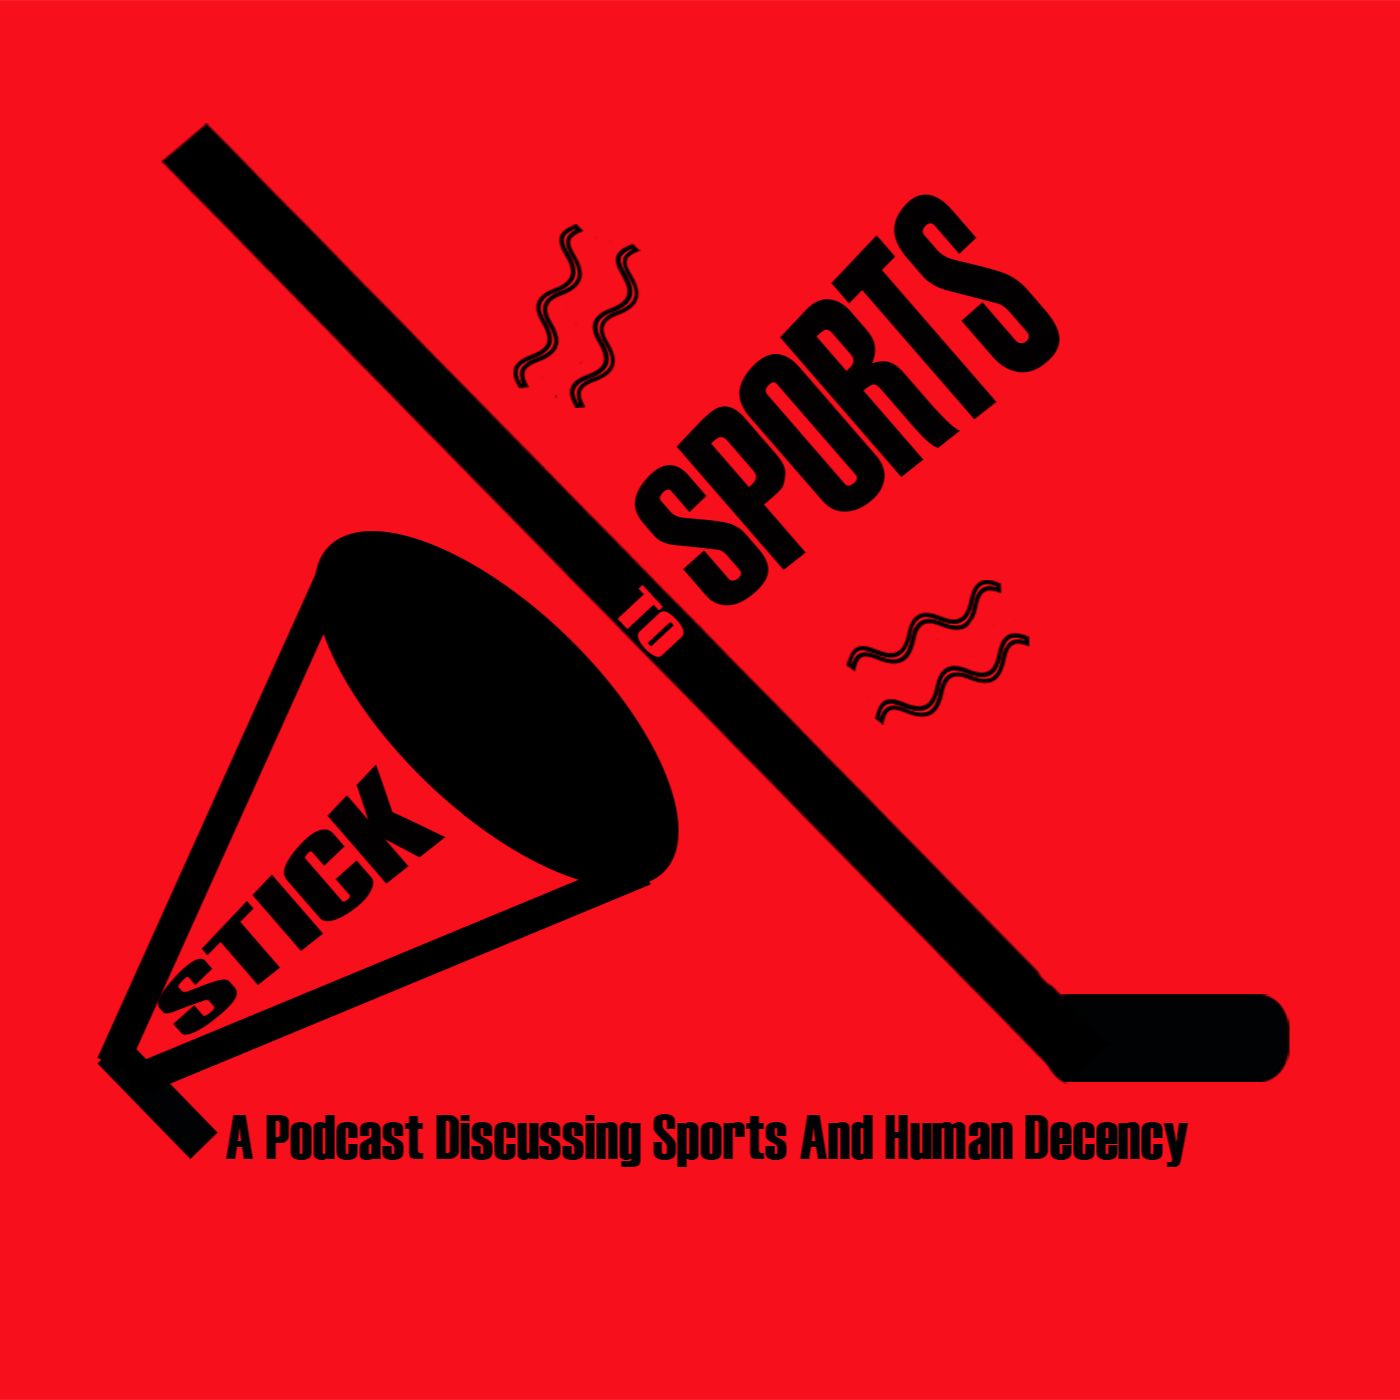 Episode64: The response from reporters to the Blackhawks covering up sexual assault